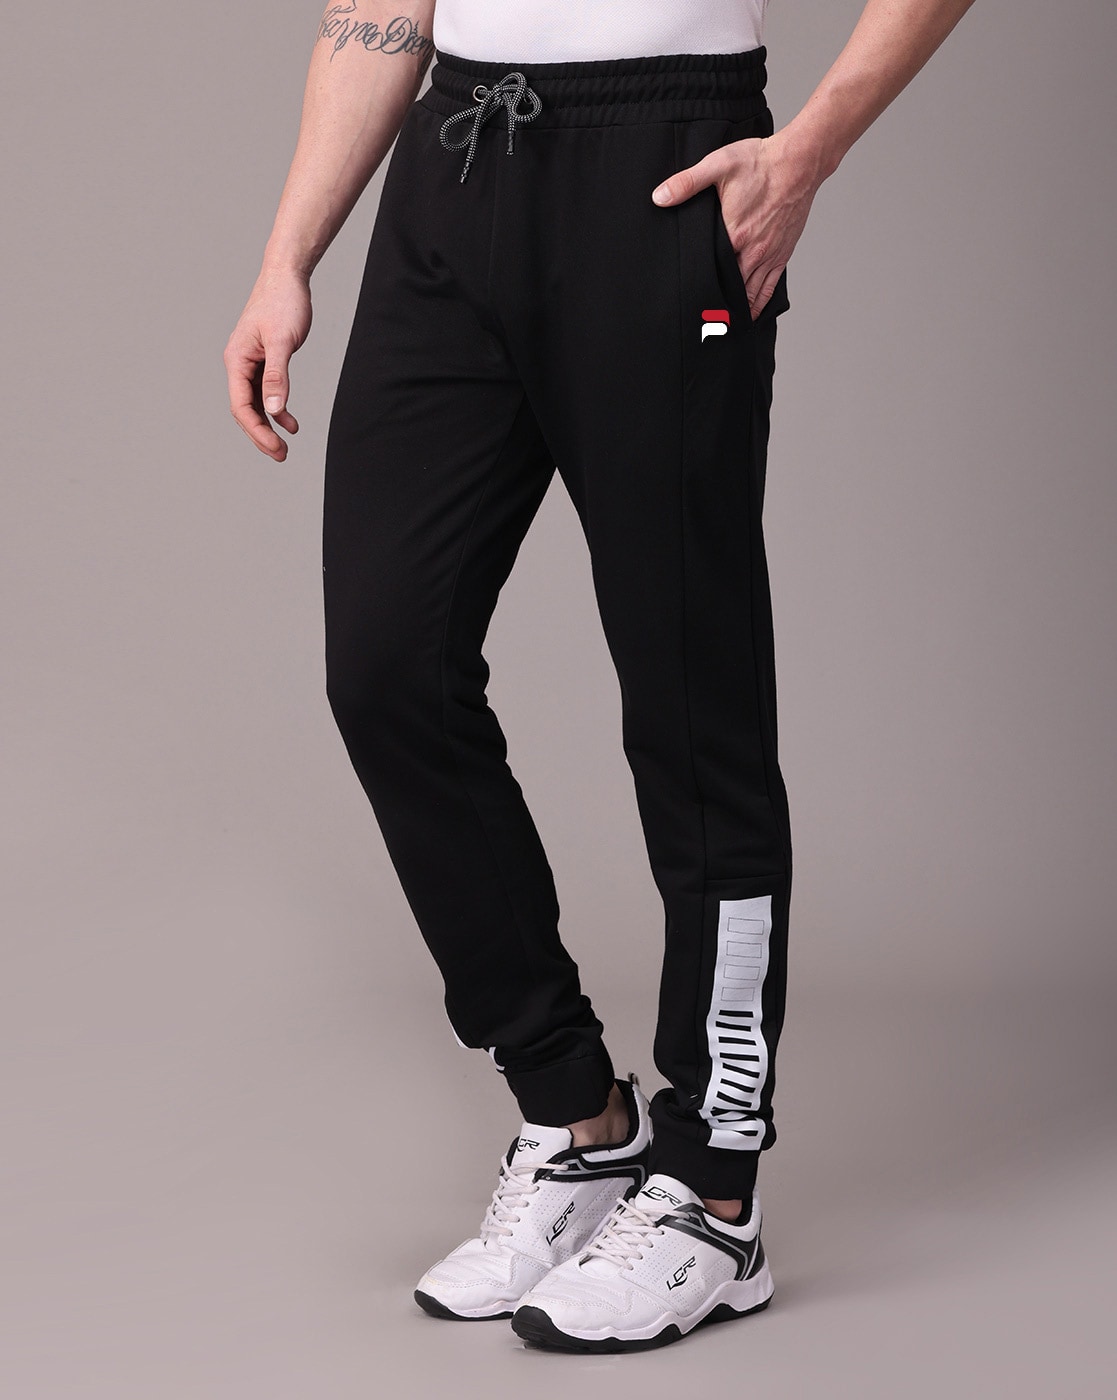 Unisex Black Track Pant Latest Design, Solid at Rs 220/piece in Meerut |  ID: 2851256507188